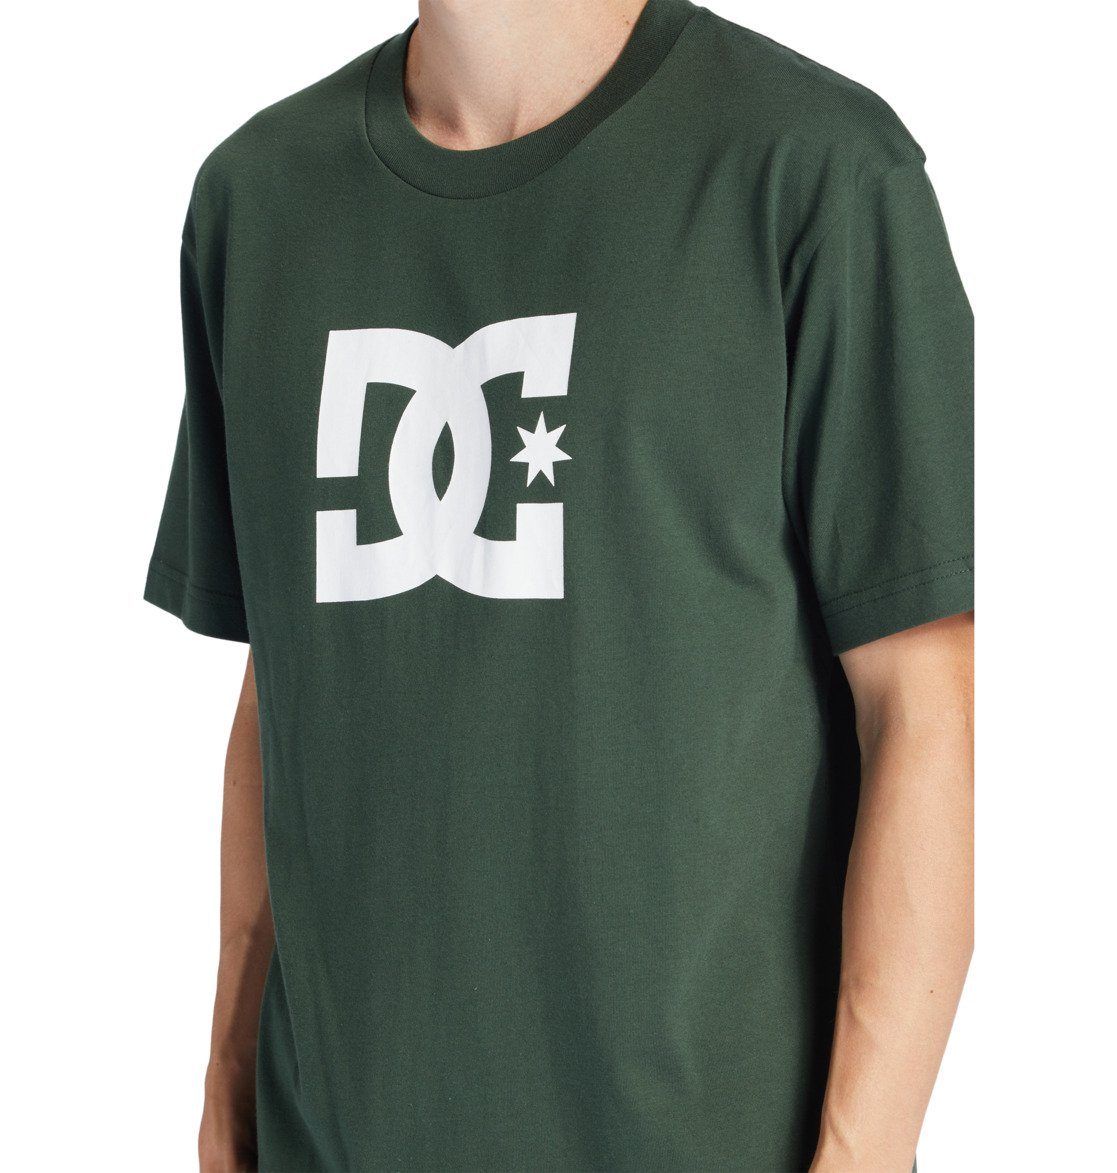 Star T-Shirt Shoes Sycamore DC DC